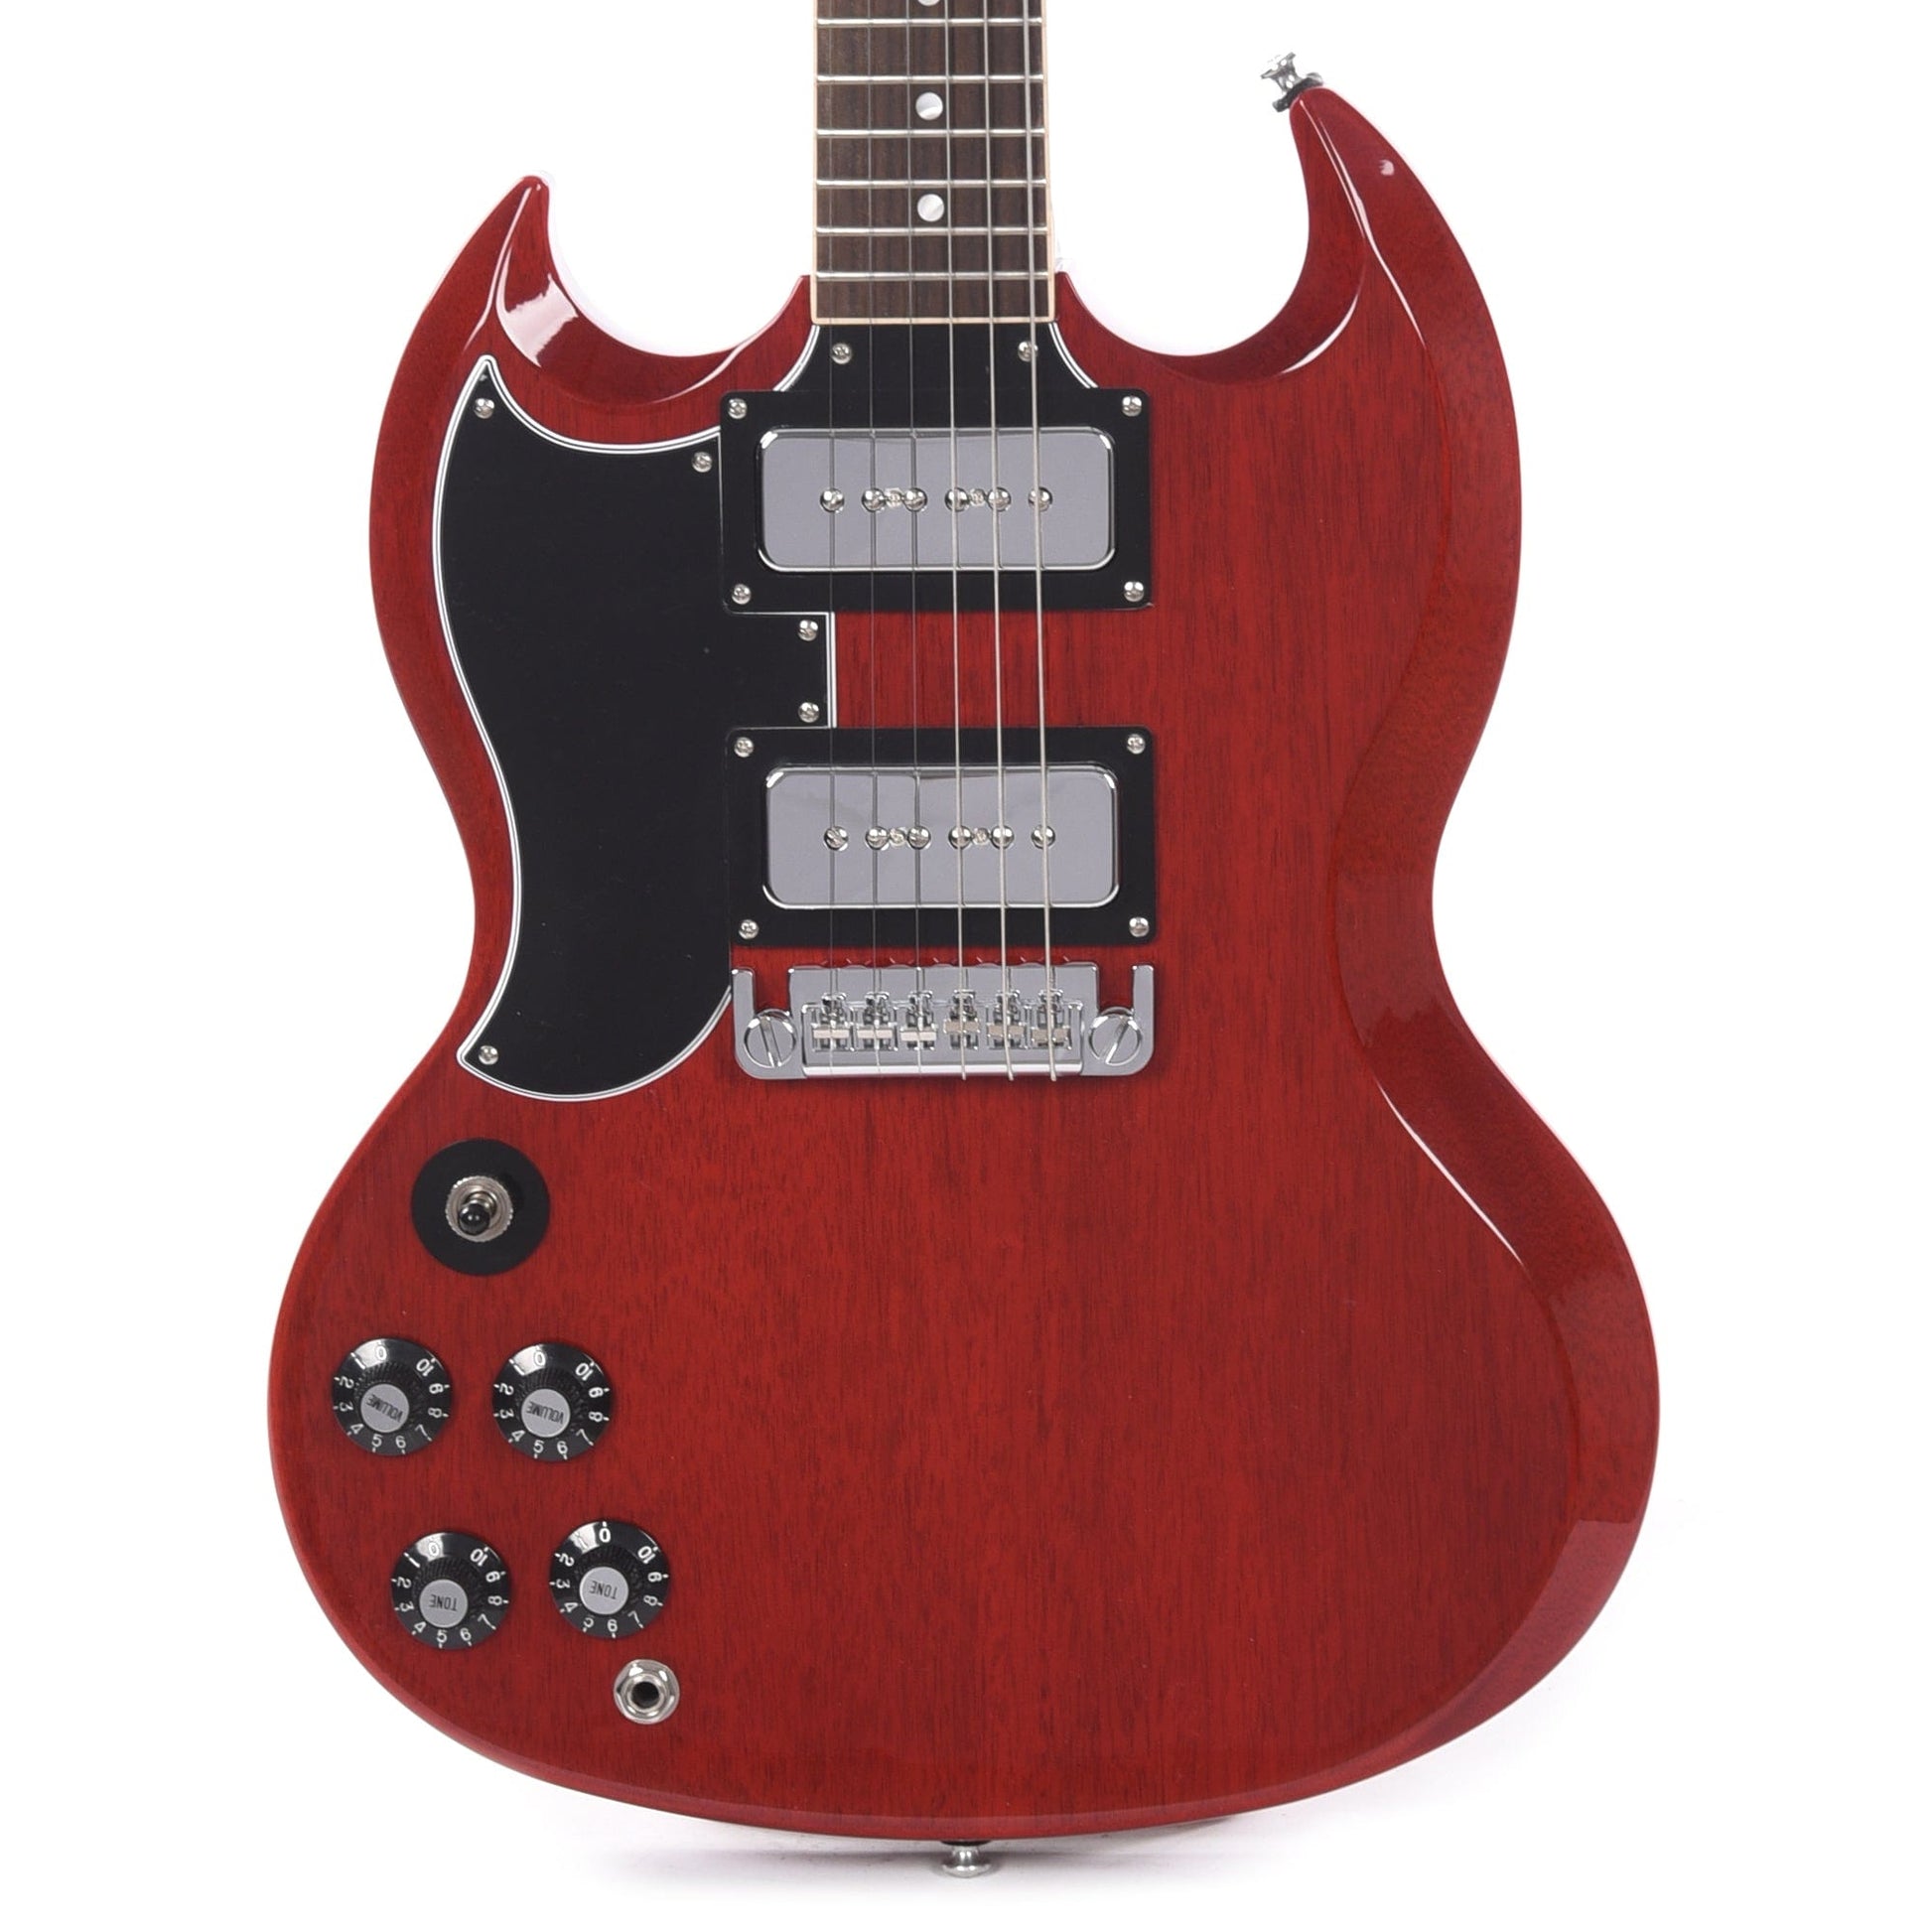 Gibson USA Tony Iommi 'Monkey' LEFTY SG Special Vintage Cherry Electric Guitars / Left-Handed